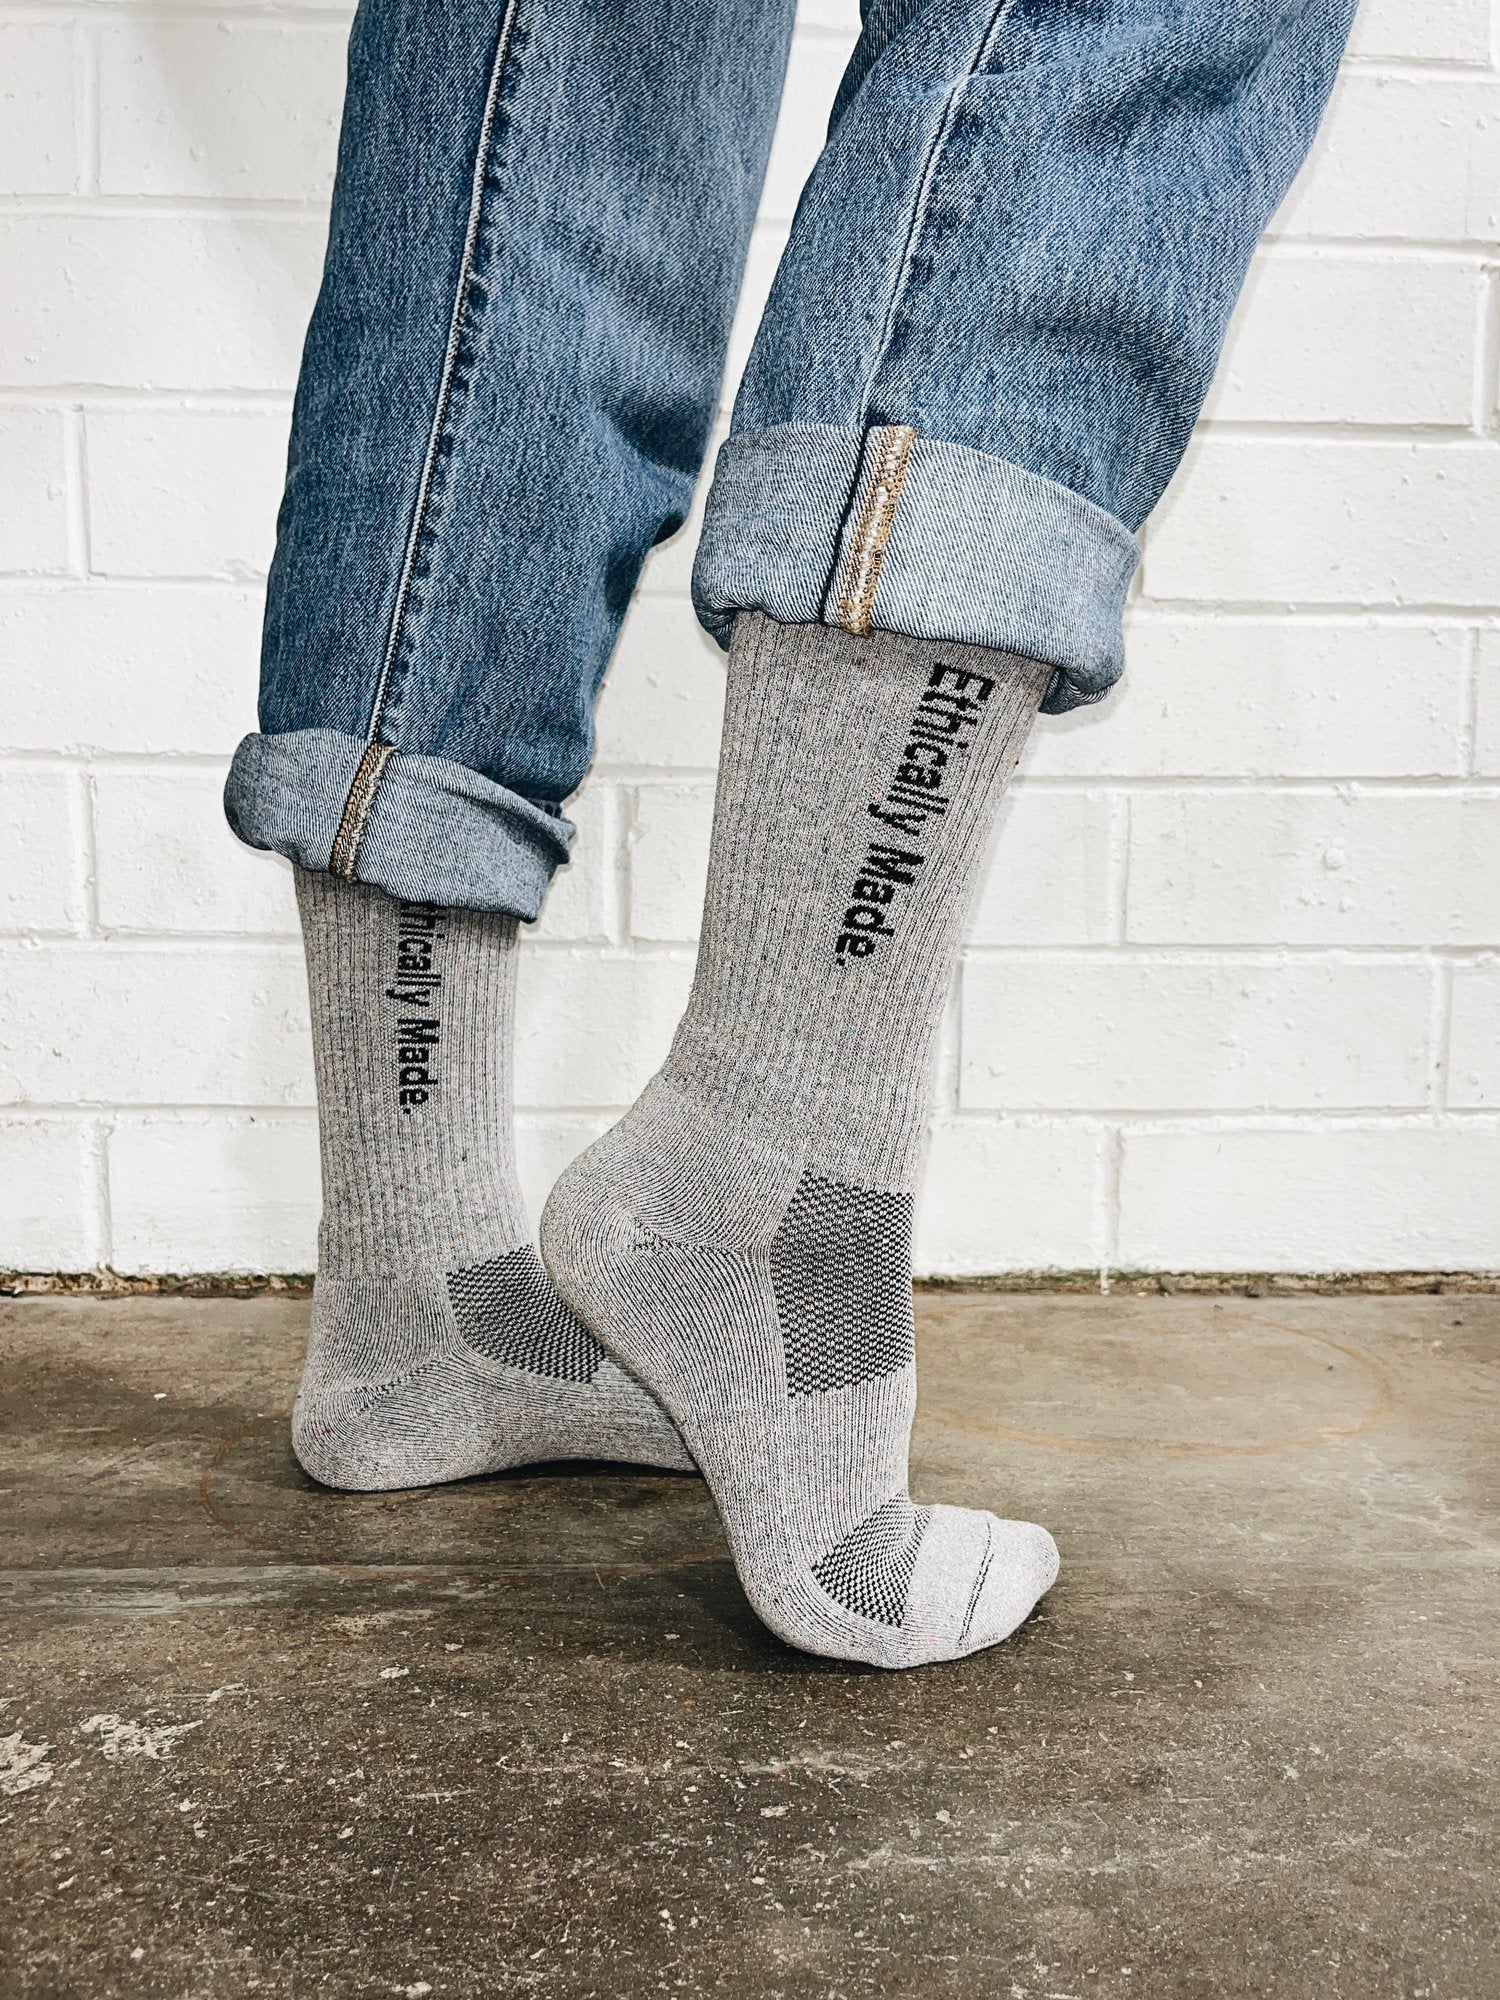 Ethically Made Socks – Ignatian Solidarity Network Online Store